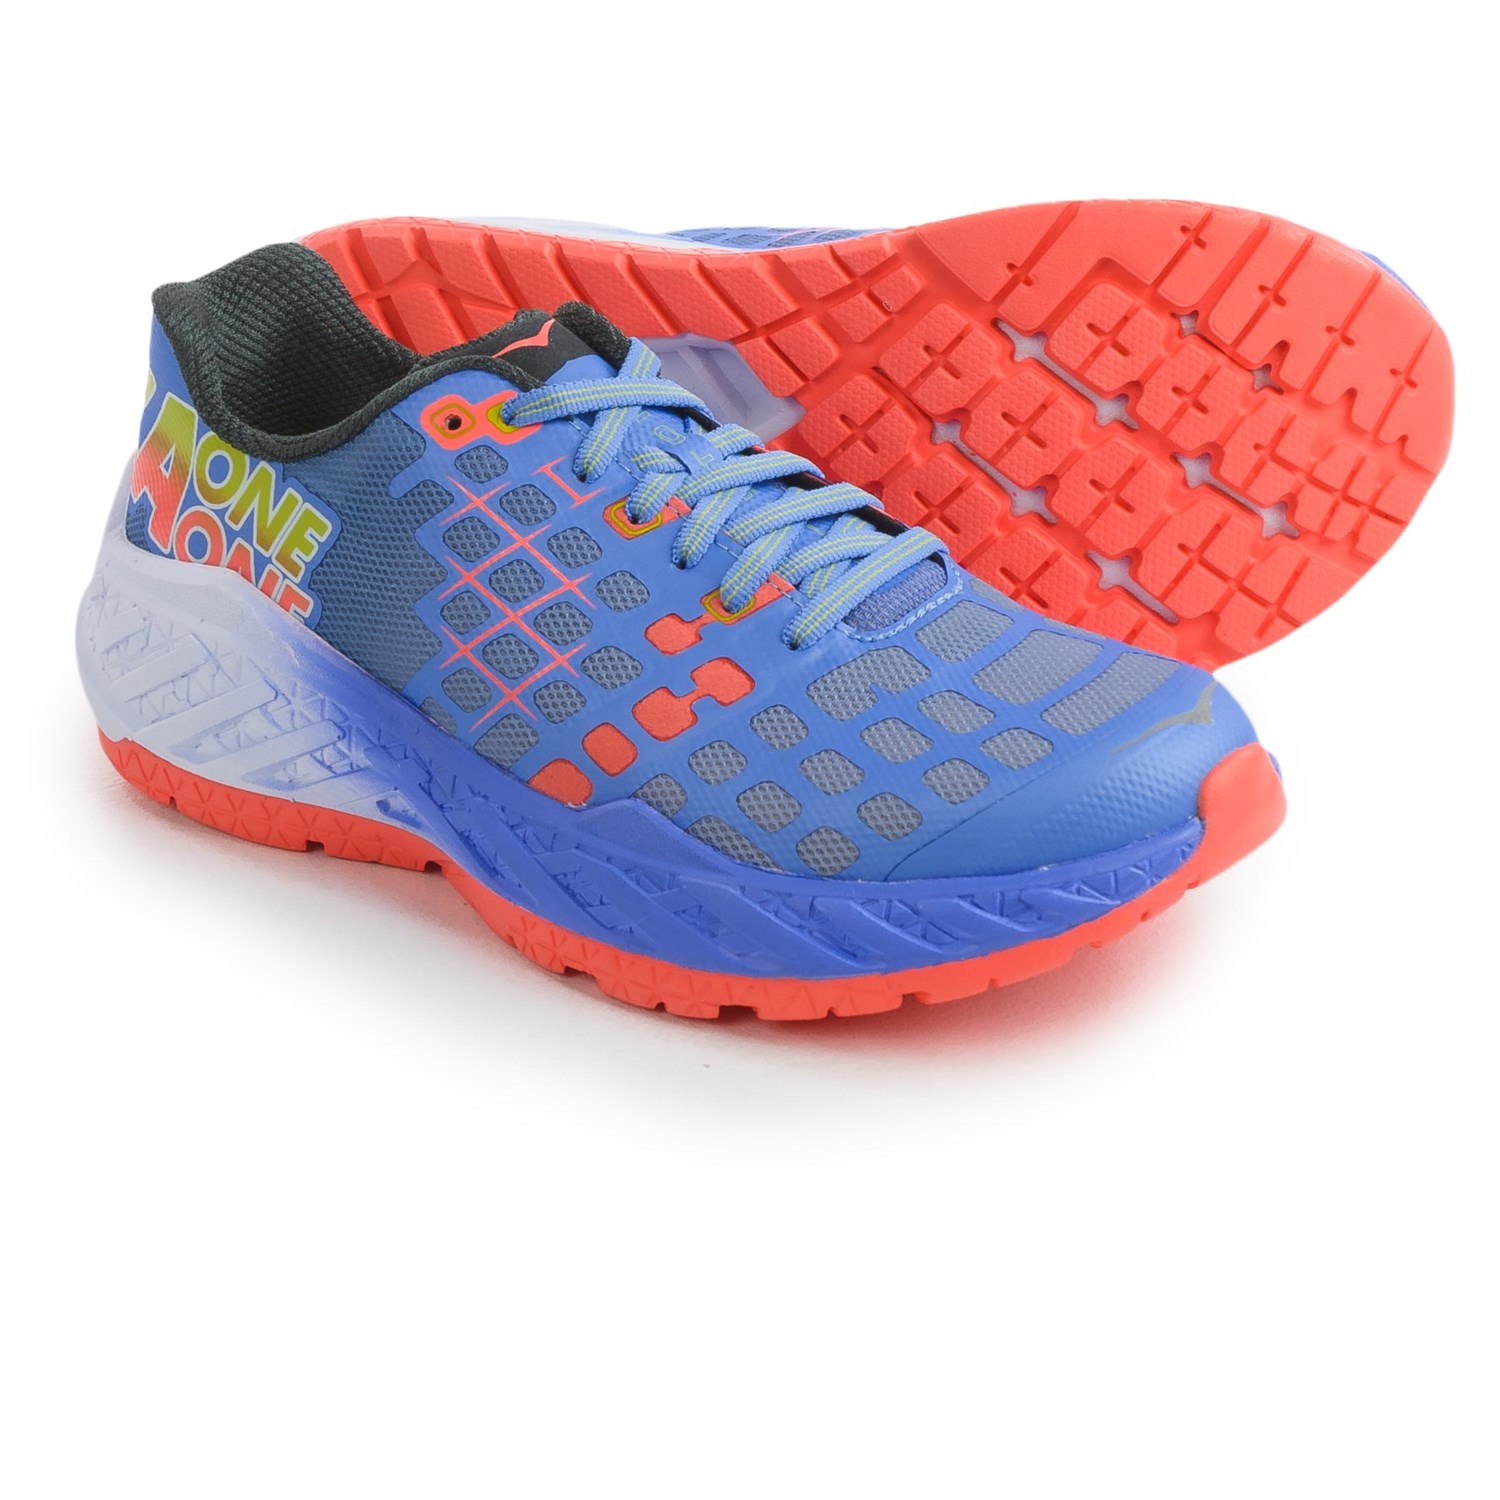 Hoka One One Clayton Running Shoes (For Women) - Save 40%